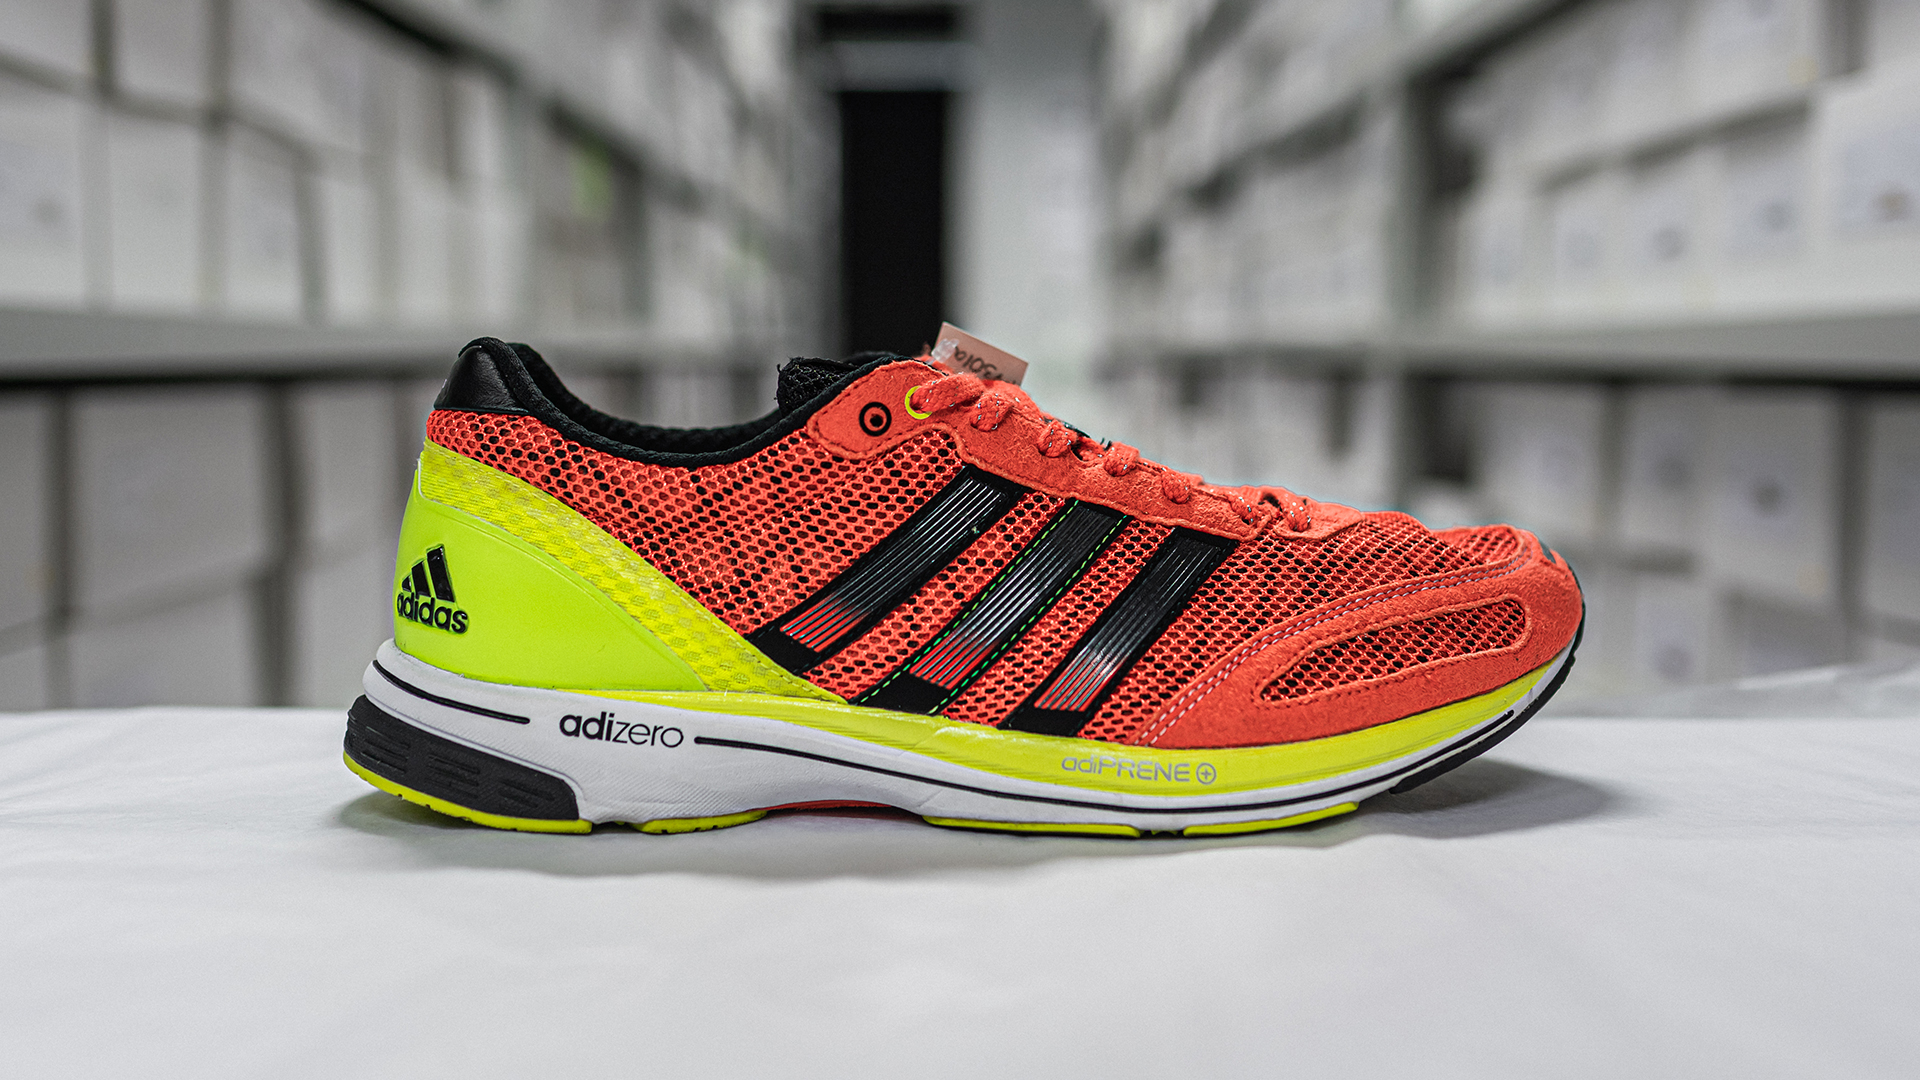 adidas Running on Twitter: "Patrick Musyoki wore the adizero adios 2 as he broke the world record at the 2011 Berlin Taking title from Haile Gebrselassie, this signalled the